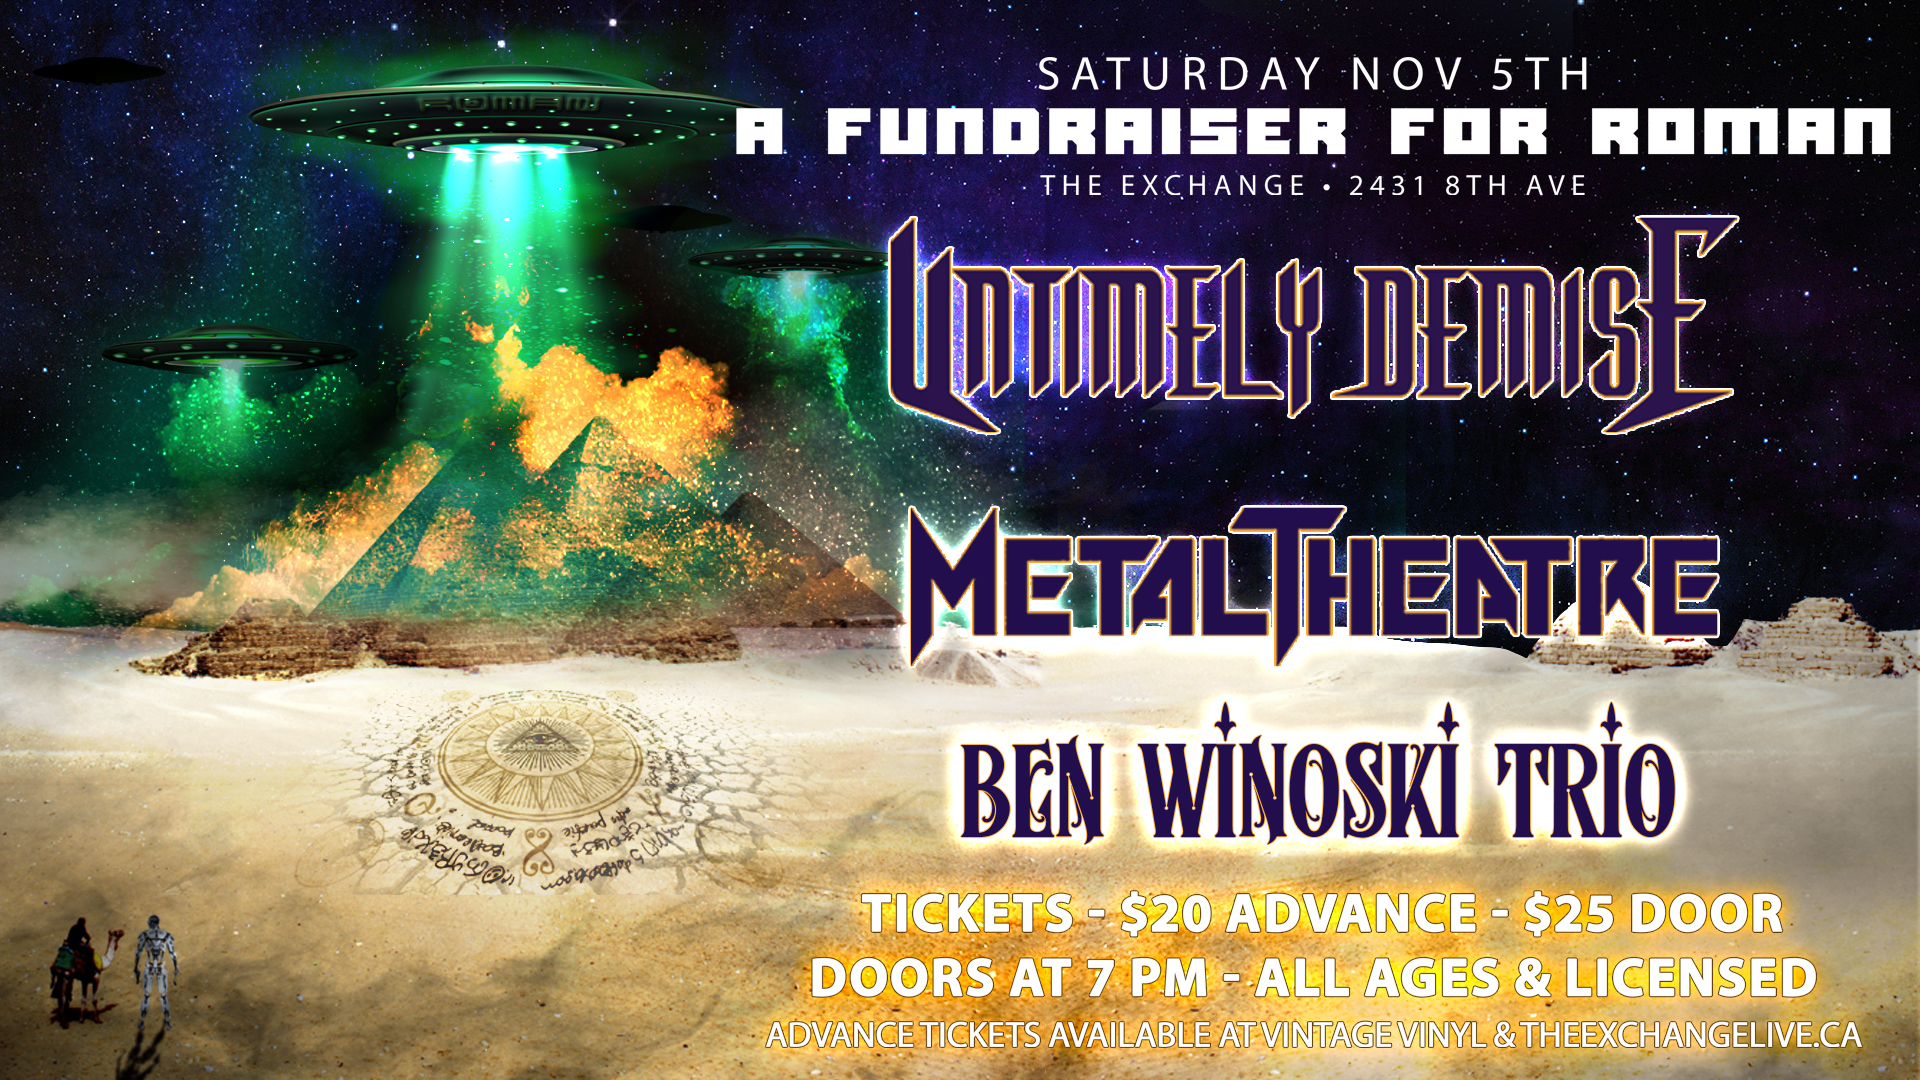 A Fundraiser for Roman - Ft. Untimely Demise, Metal Theatre, Ben Winoski Trio